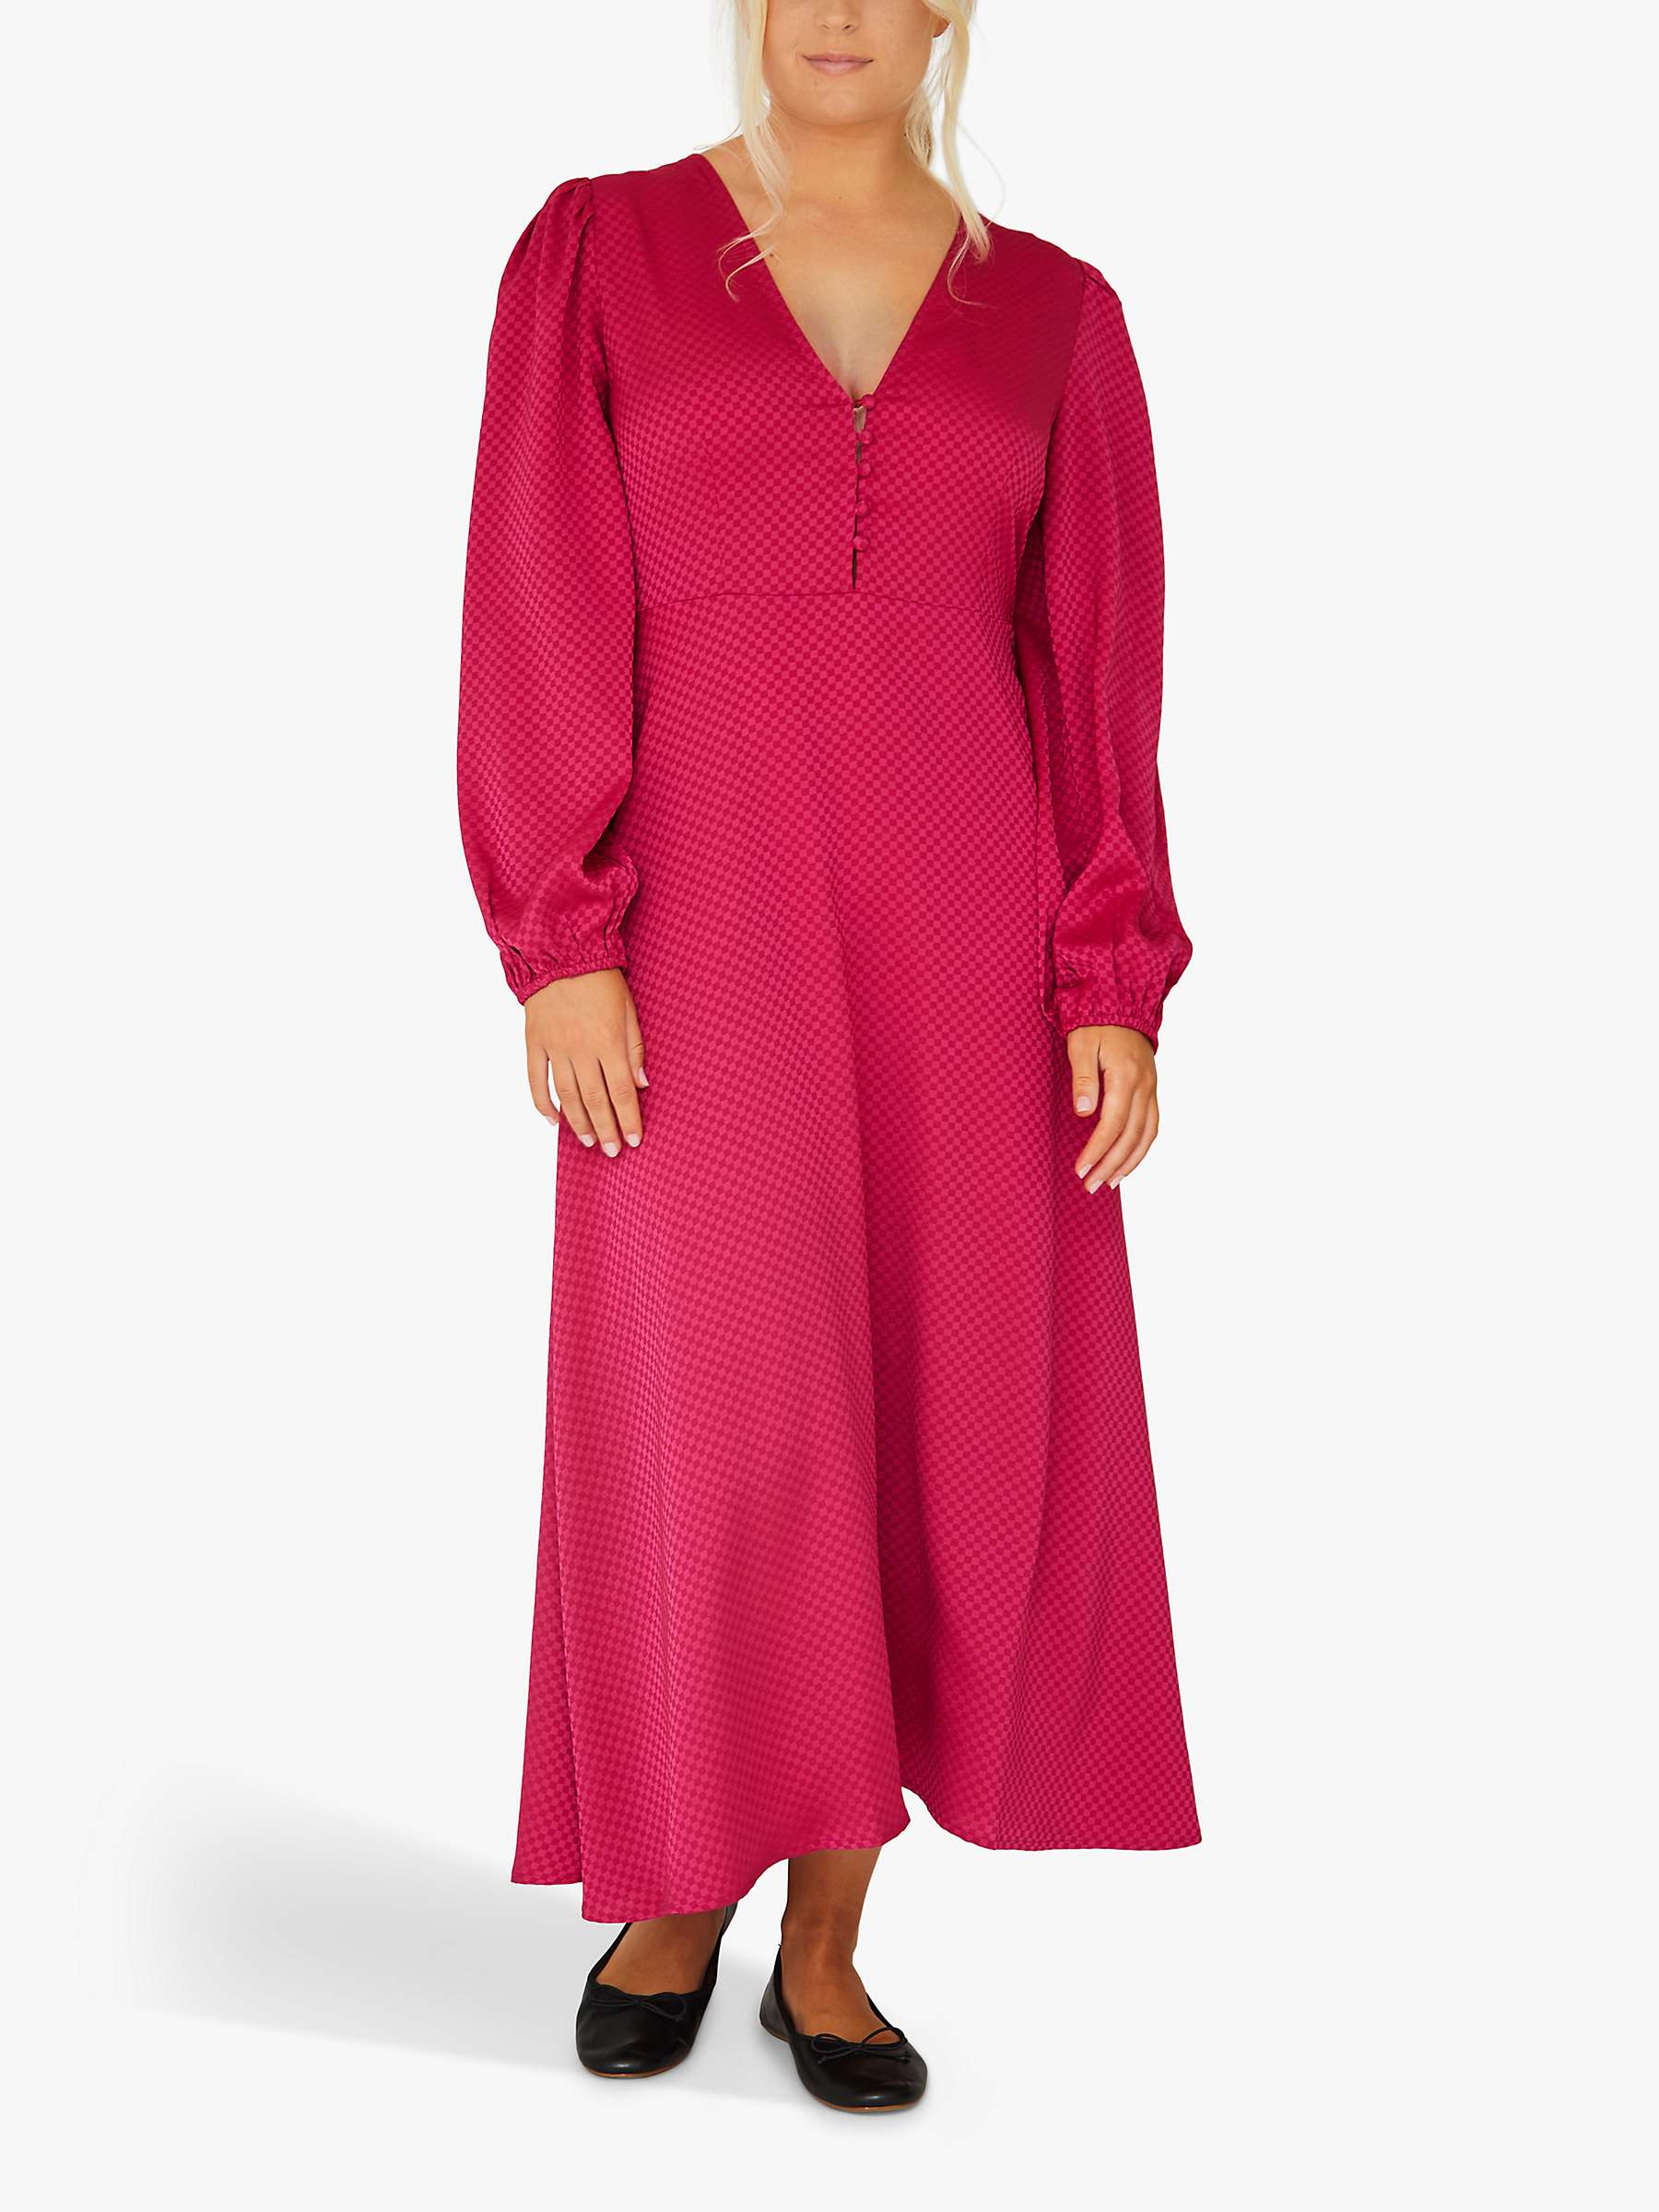 Buy A-VIEW Enitta Long Sleeve Midi Dress, Pink Online at johnlewis.com